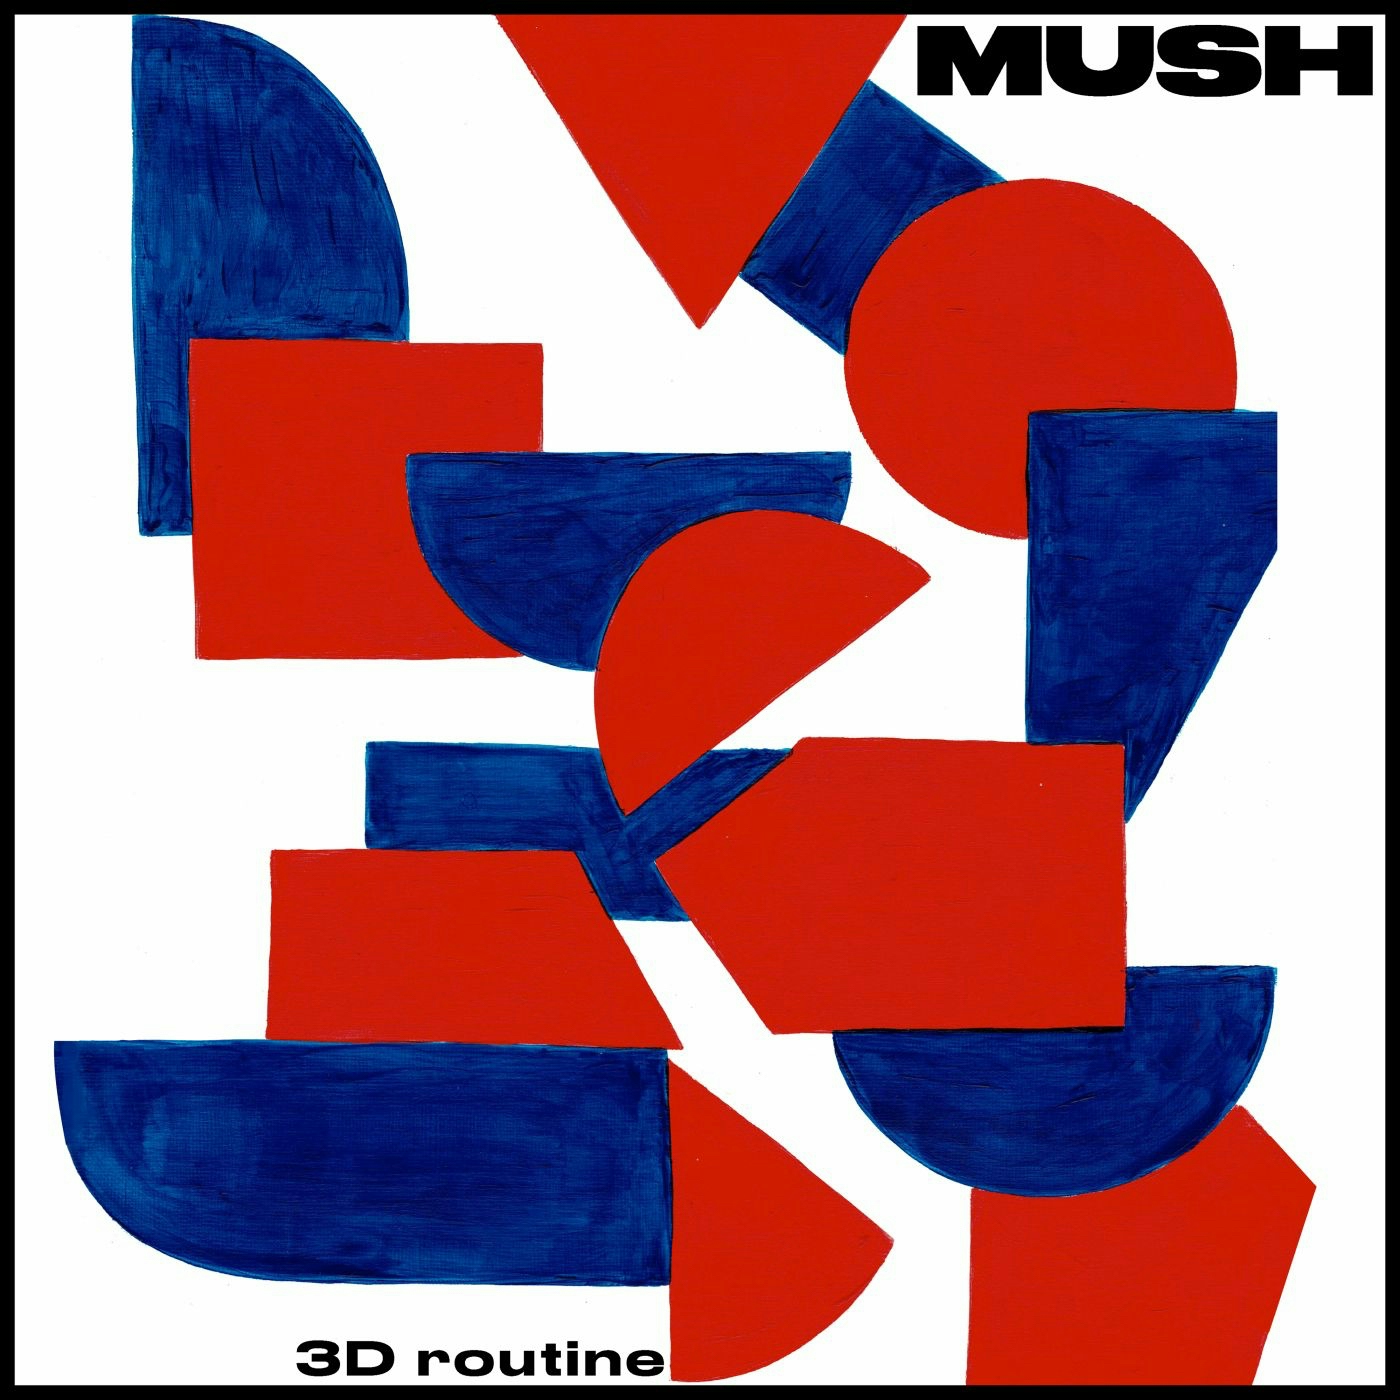 Album artwork for 3D Routine by Mush